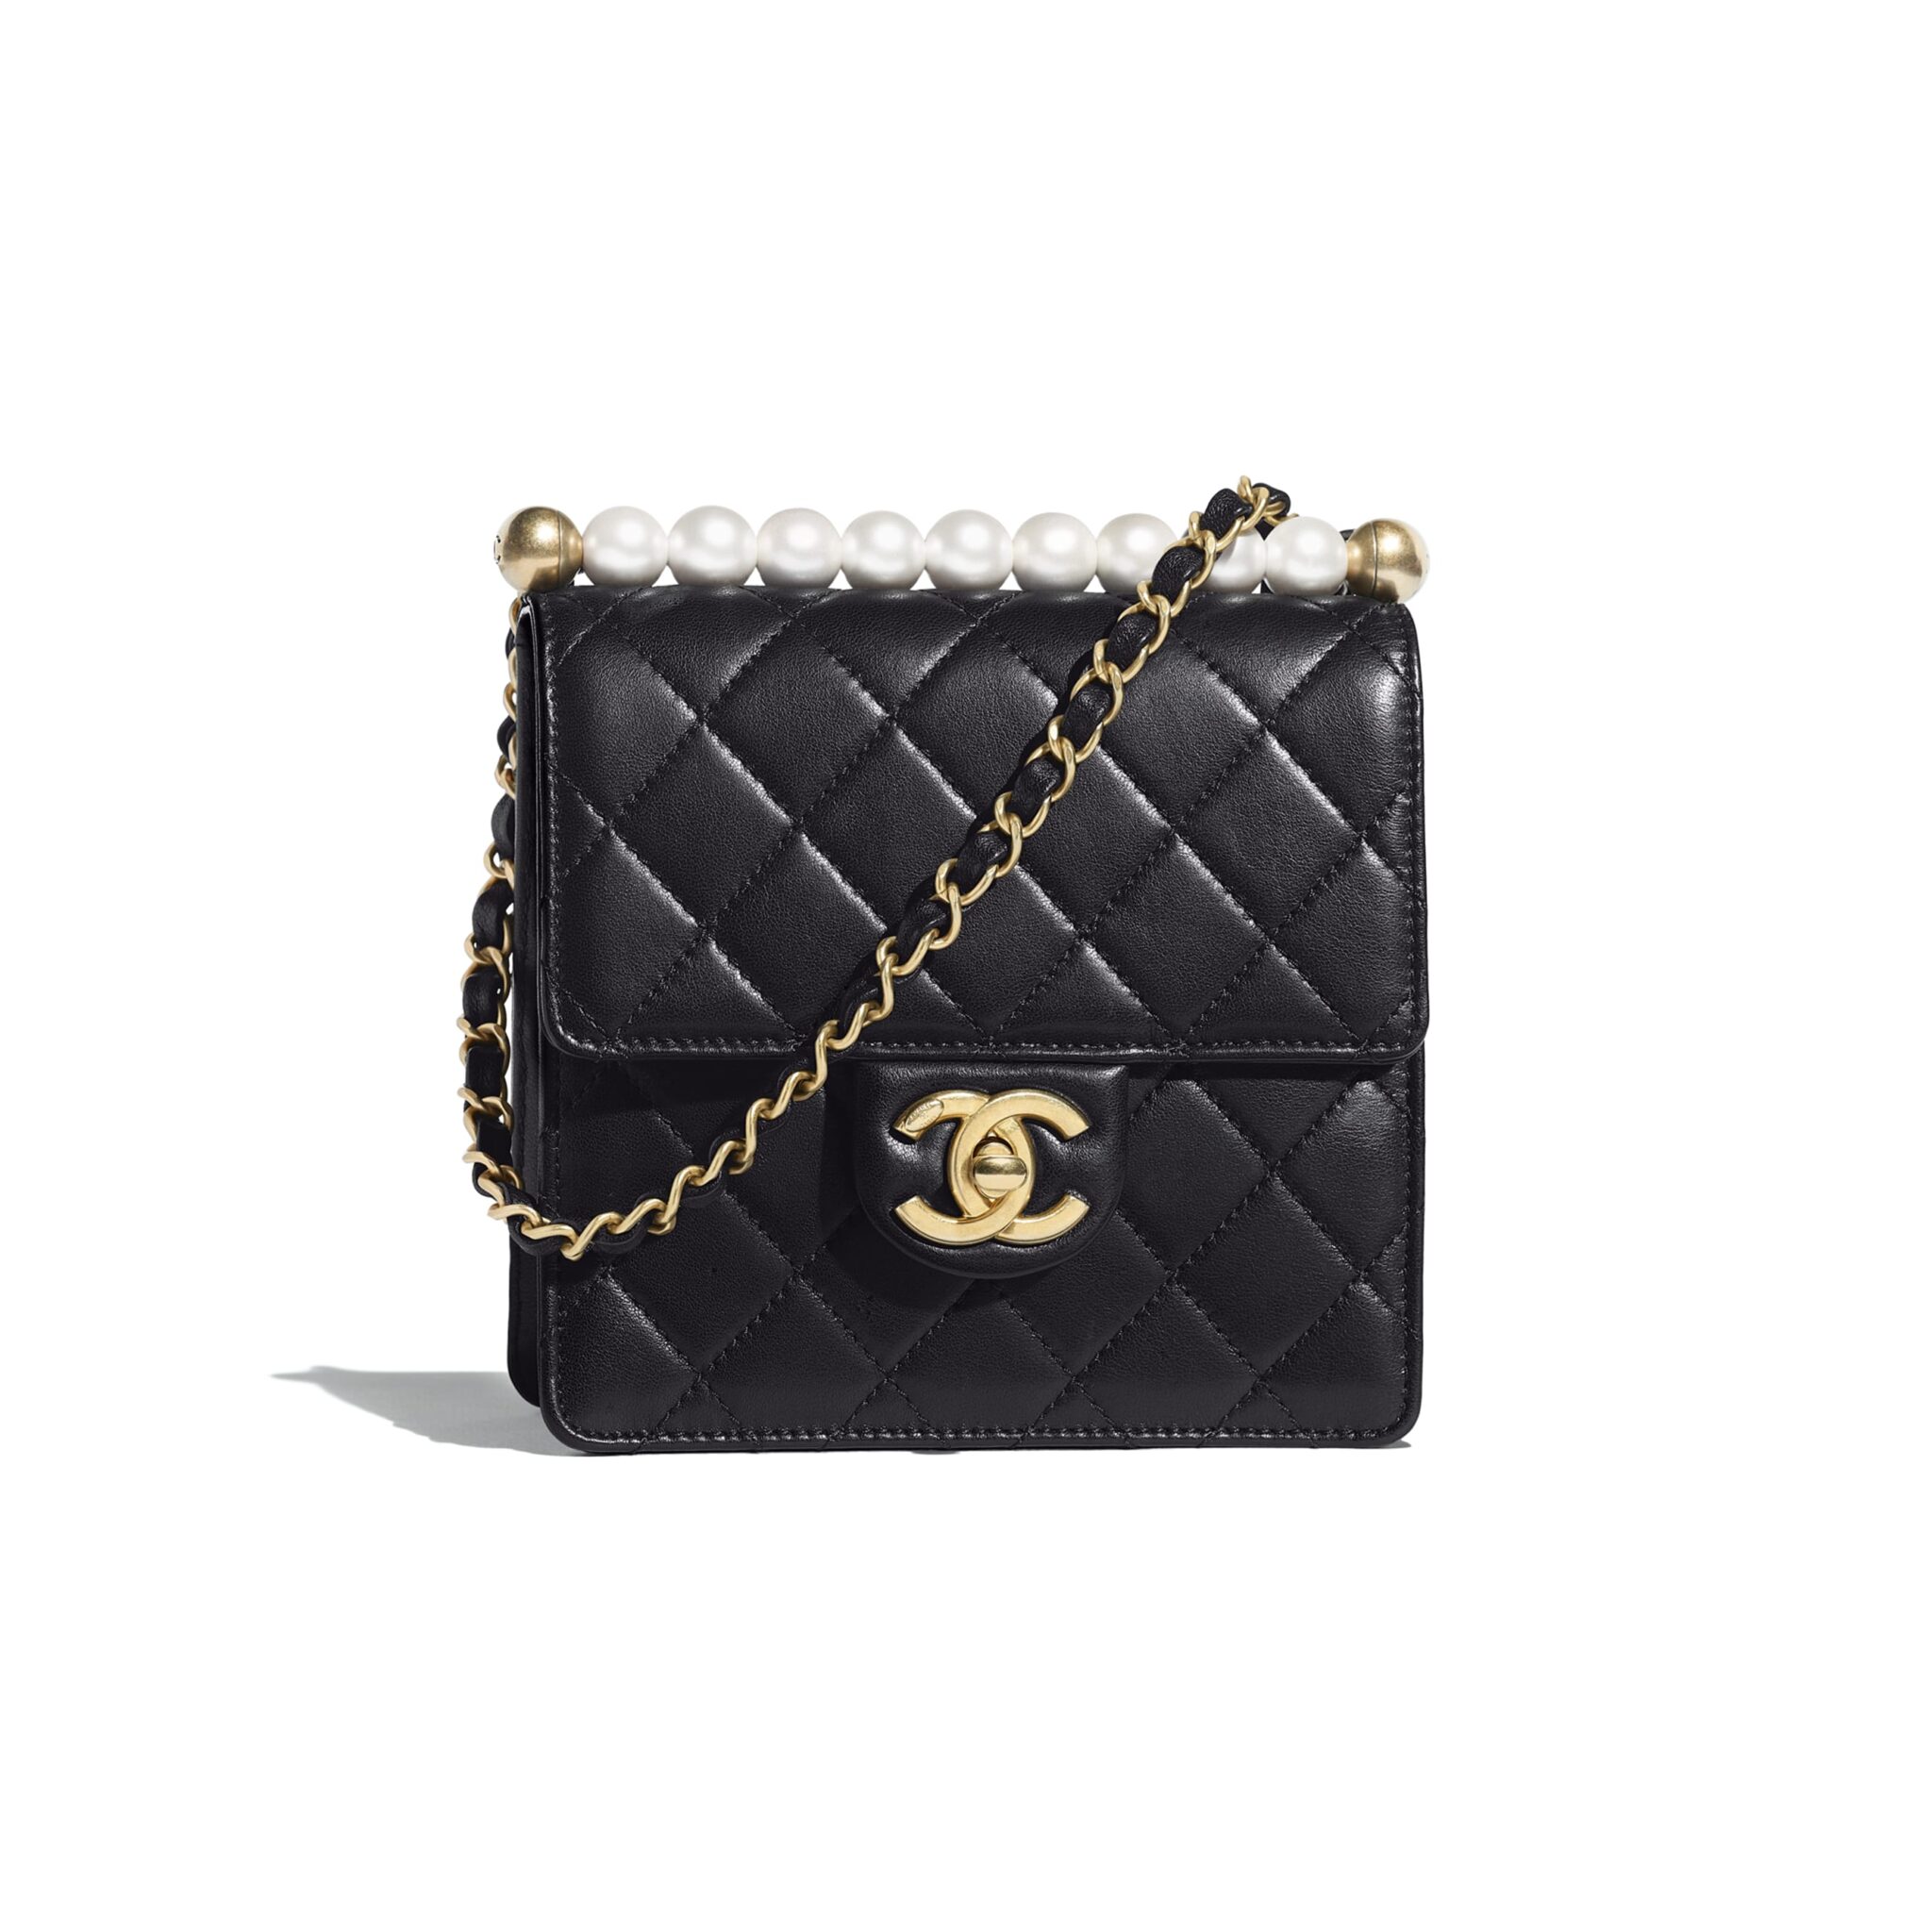 Chanel Small Quilted Chic Pearls Flap Bag